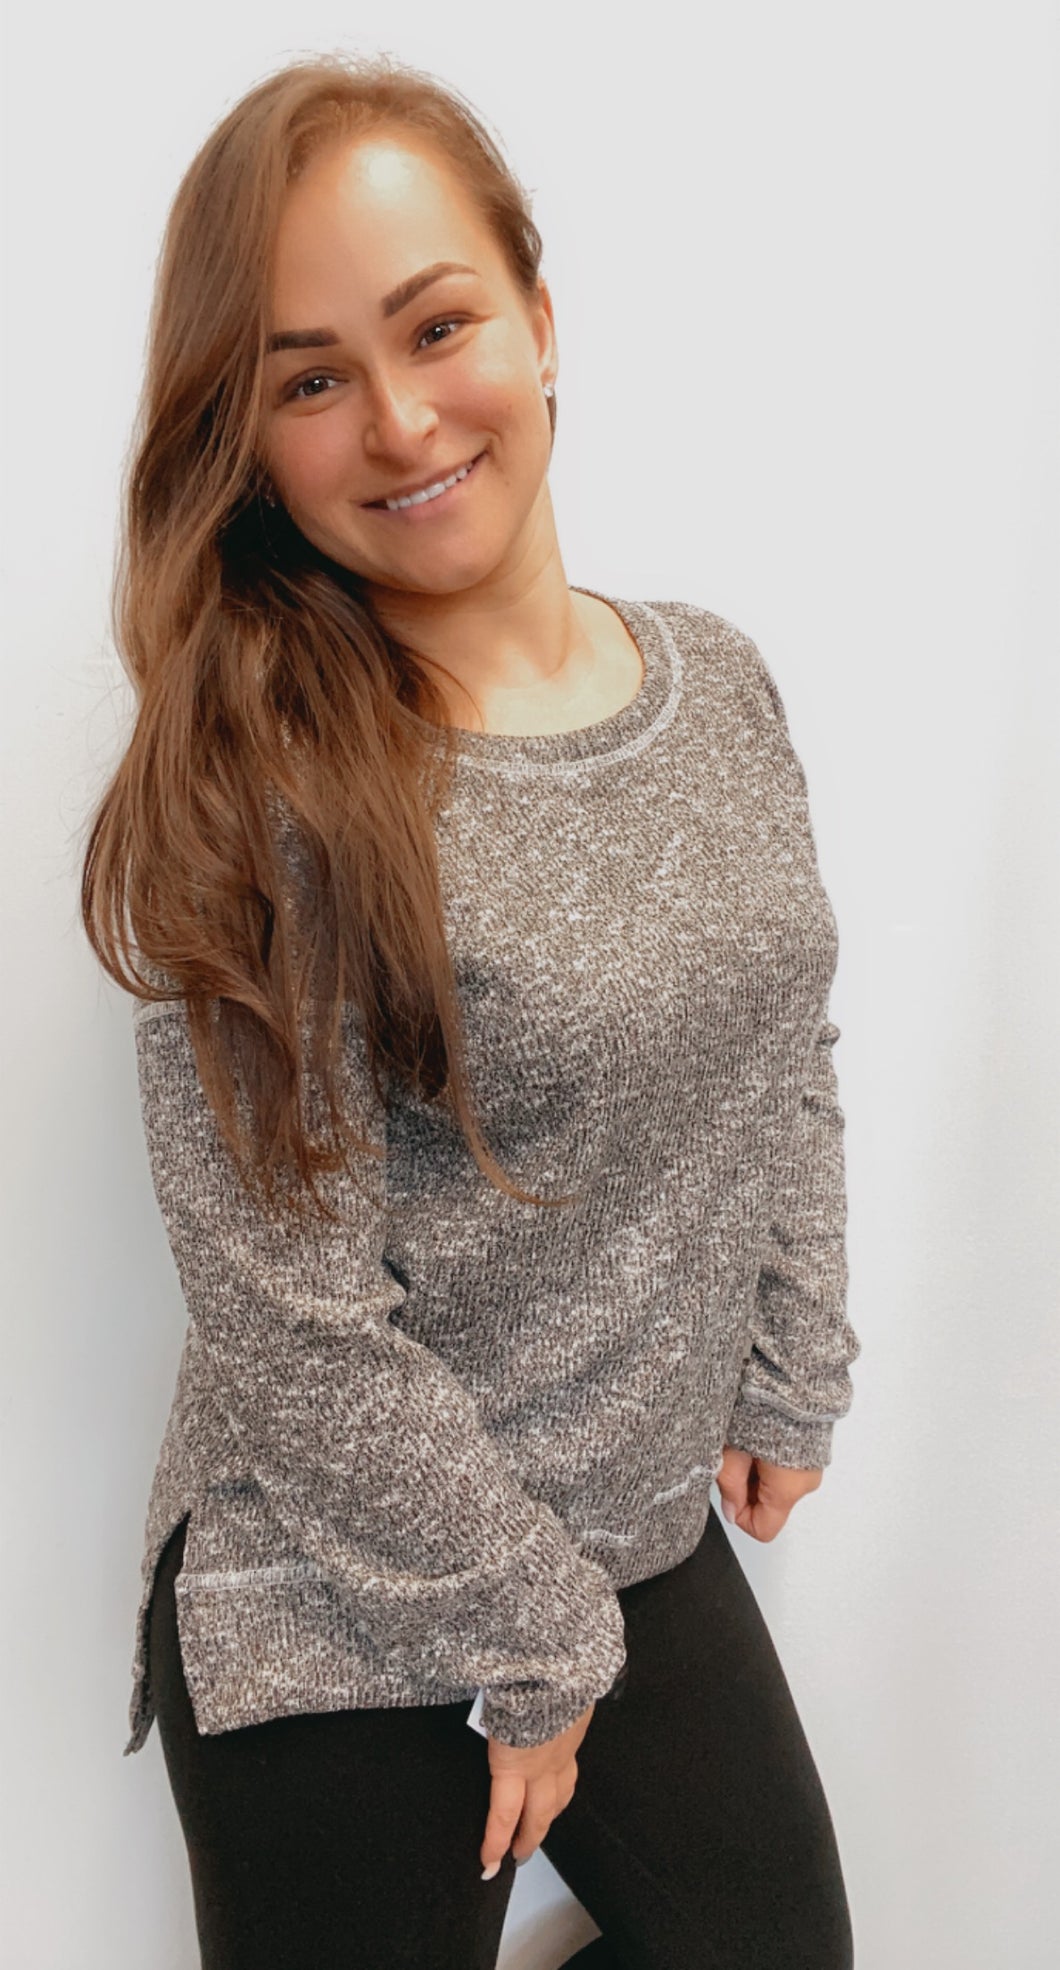 Super soft charcoal high lo light weight sweater